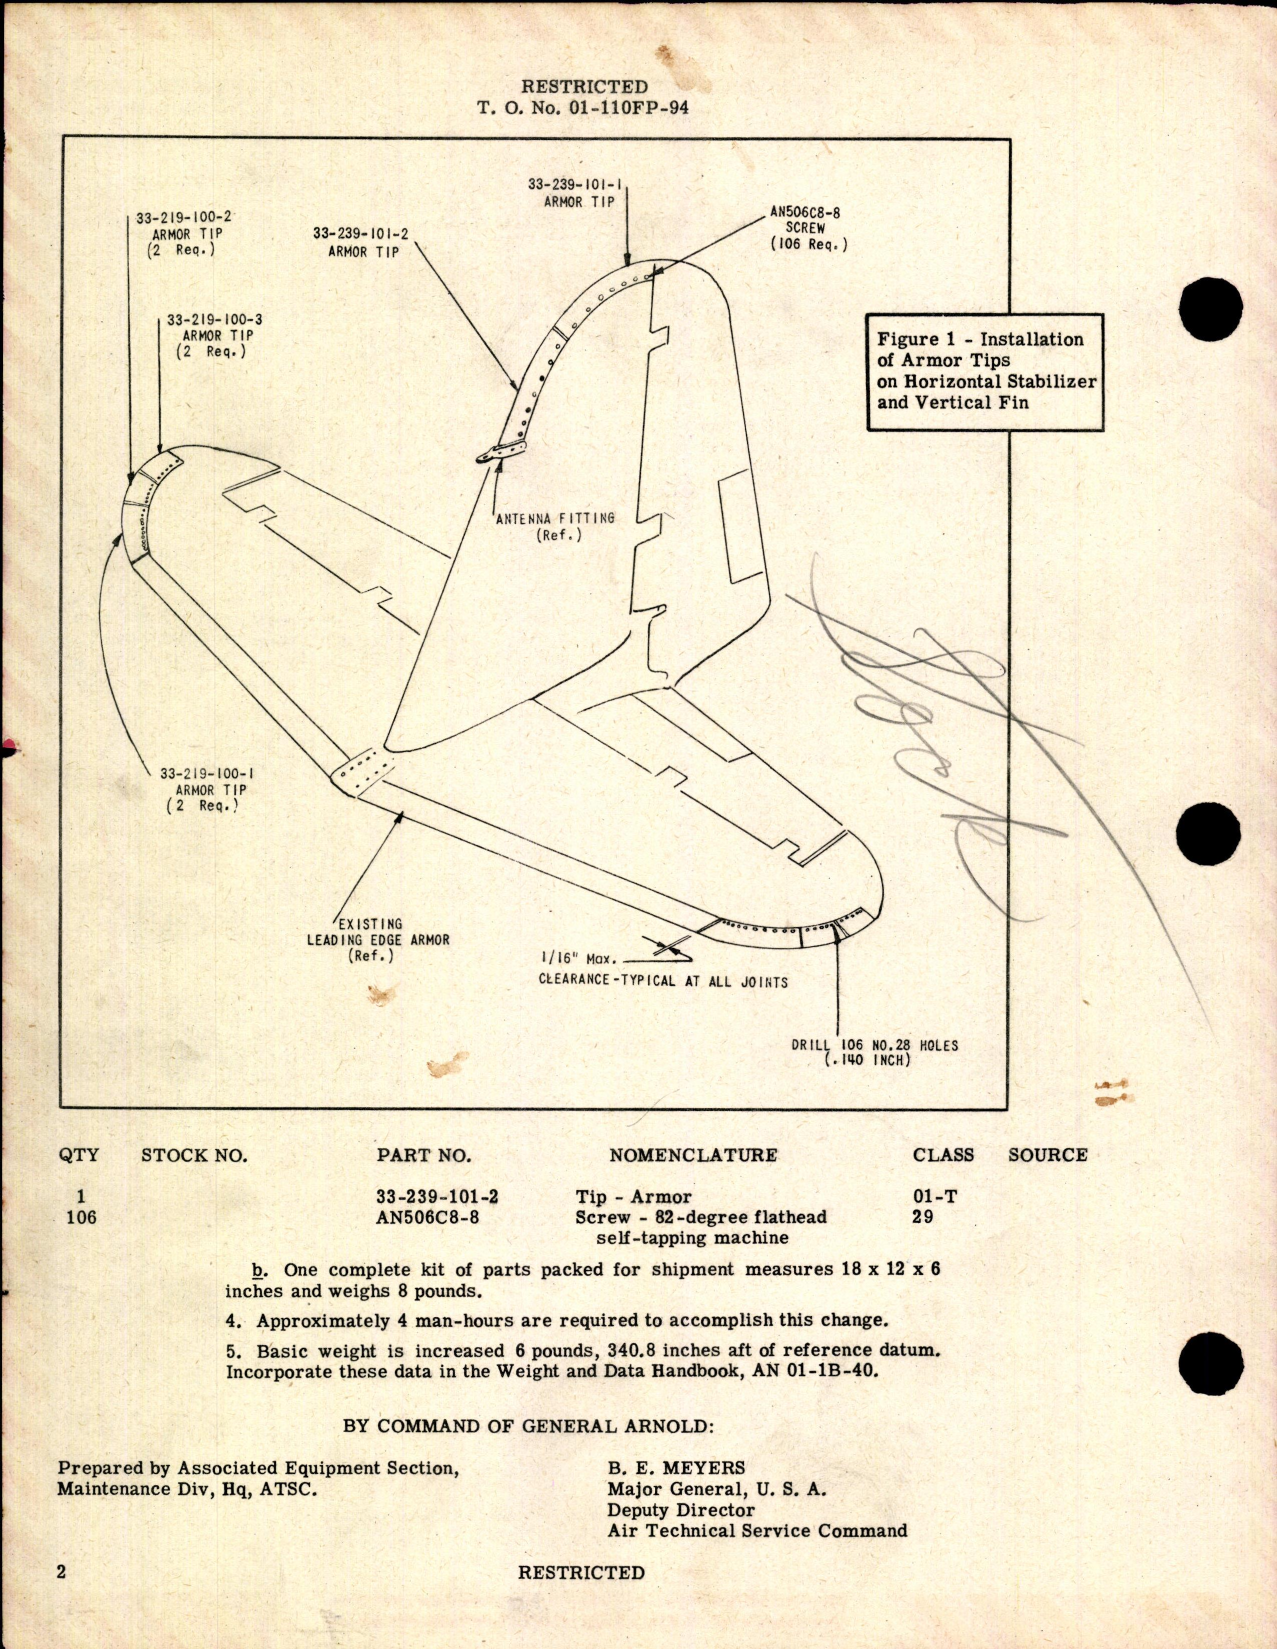 Sample page 2 from AirCorps Library document: Armor Tips on Horizontal Stabilizer & Vertical Fin